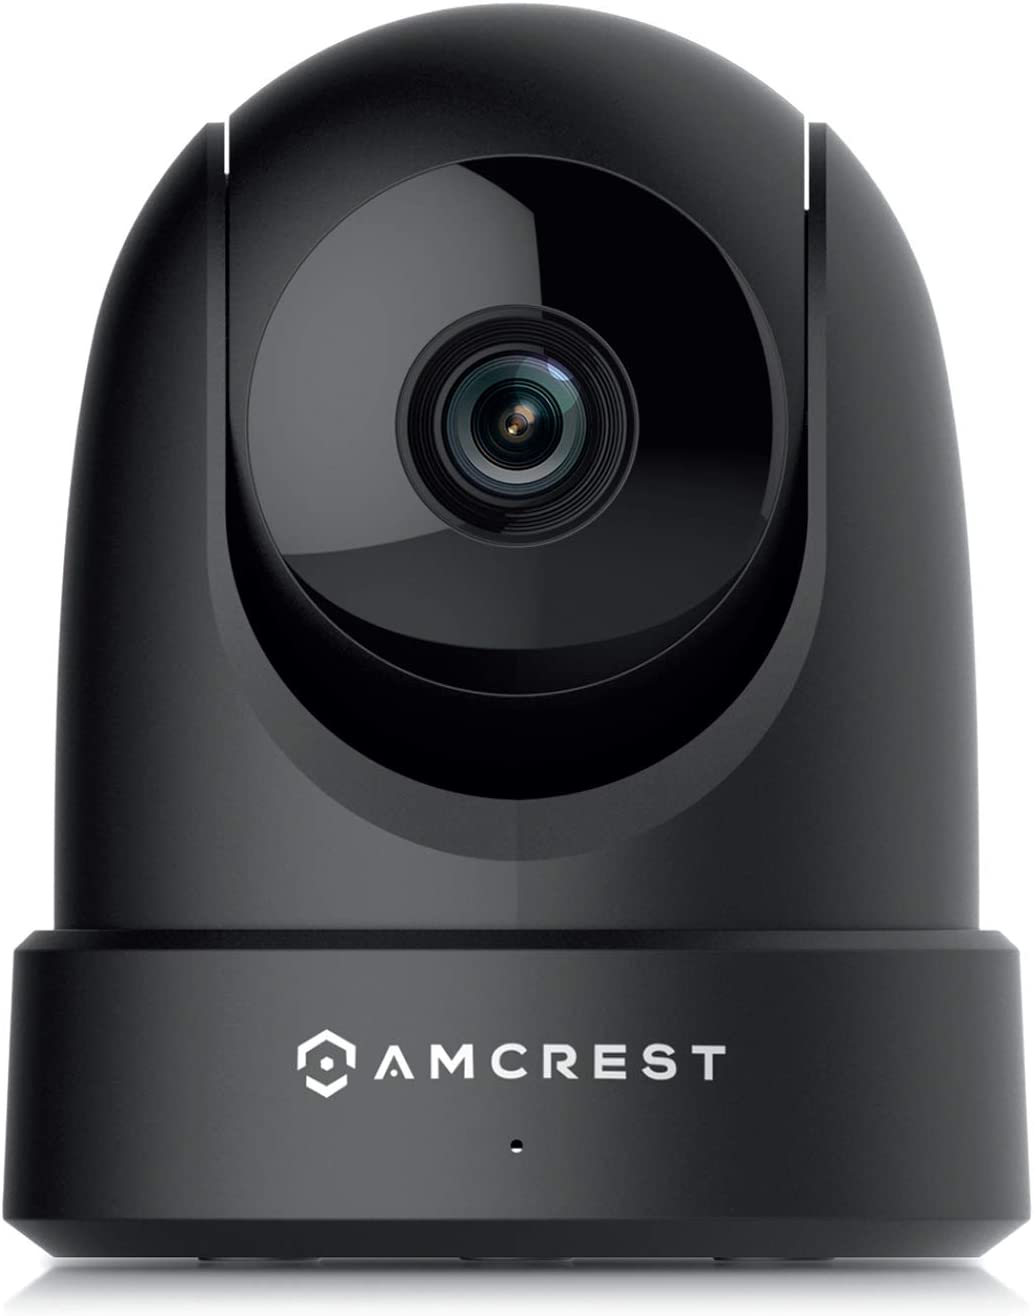 Amcrest 4MP UltraHD Indoor WiFi Camera, Security IP Camera with Pan/Tilt, Two-Way Audio, Night Vision, Remote Viewing, Dual-Band 5ghz/2.4ghz, 4-Megapixel @~20FPS, Wide 120° FOV, IP4M-1051B (Black)